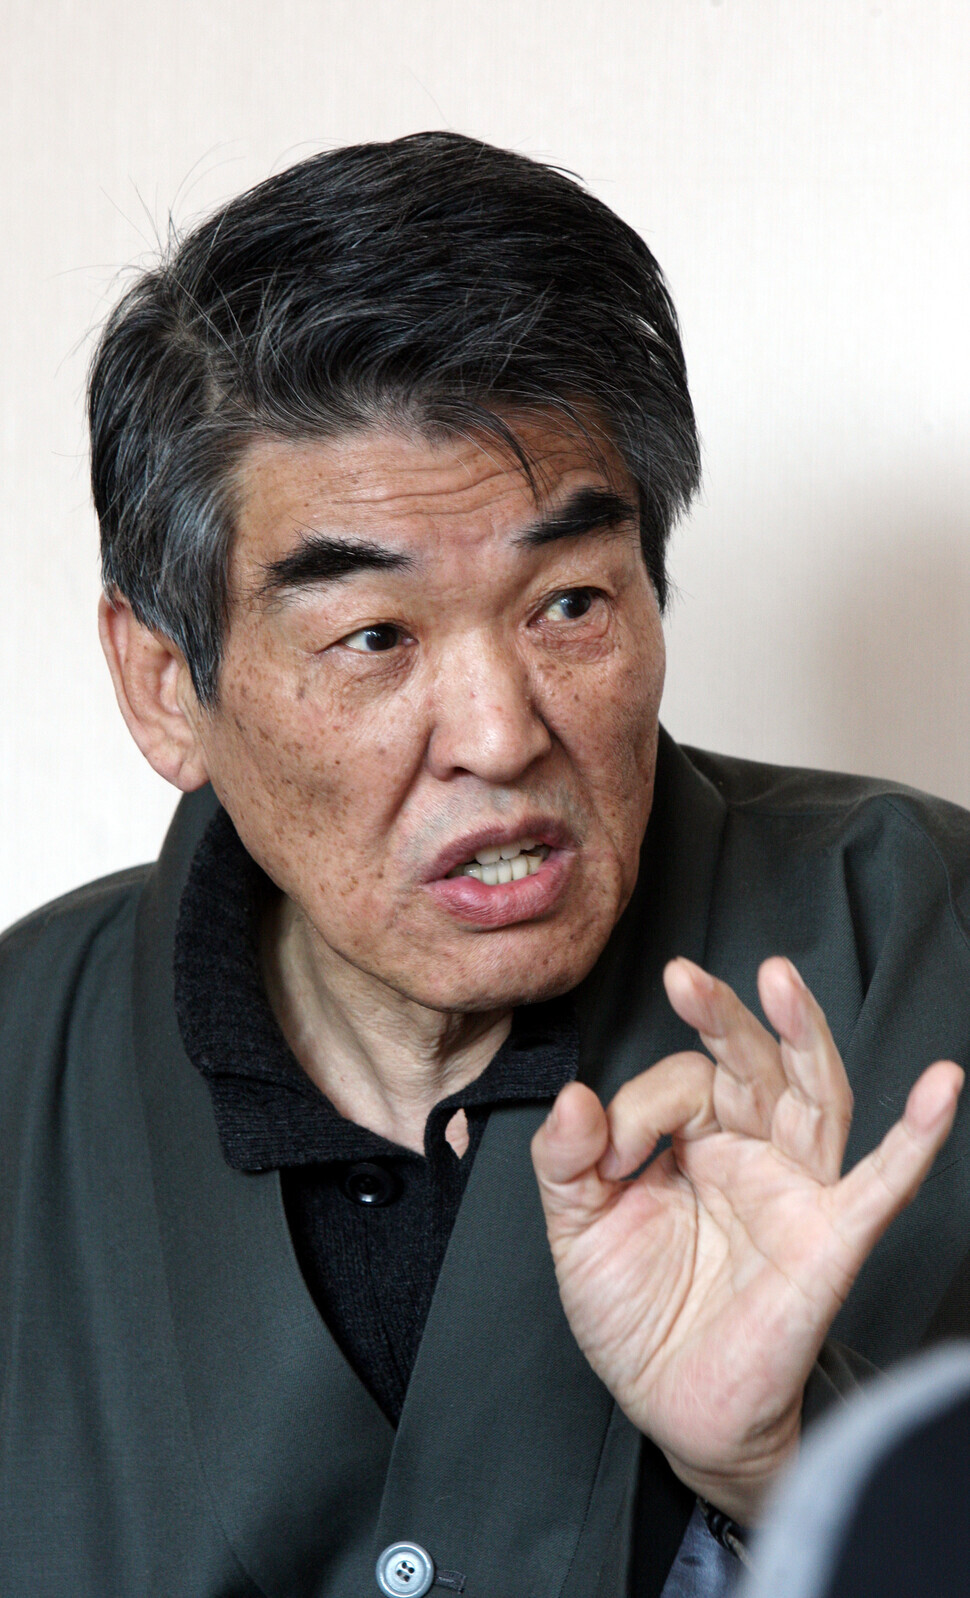 Poet Kim Chi-ha, pictured here, died on May 8. (Hankyoreh file photo)